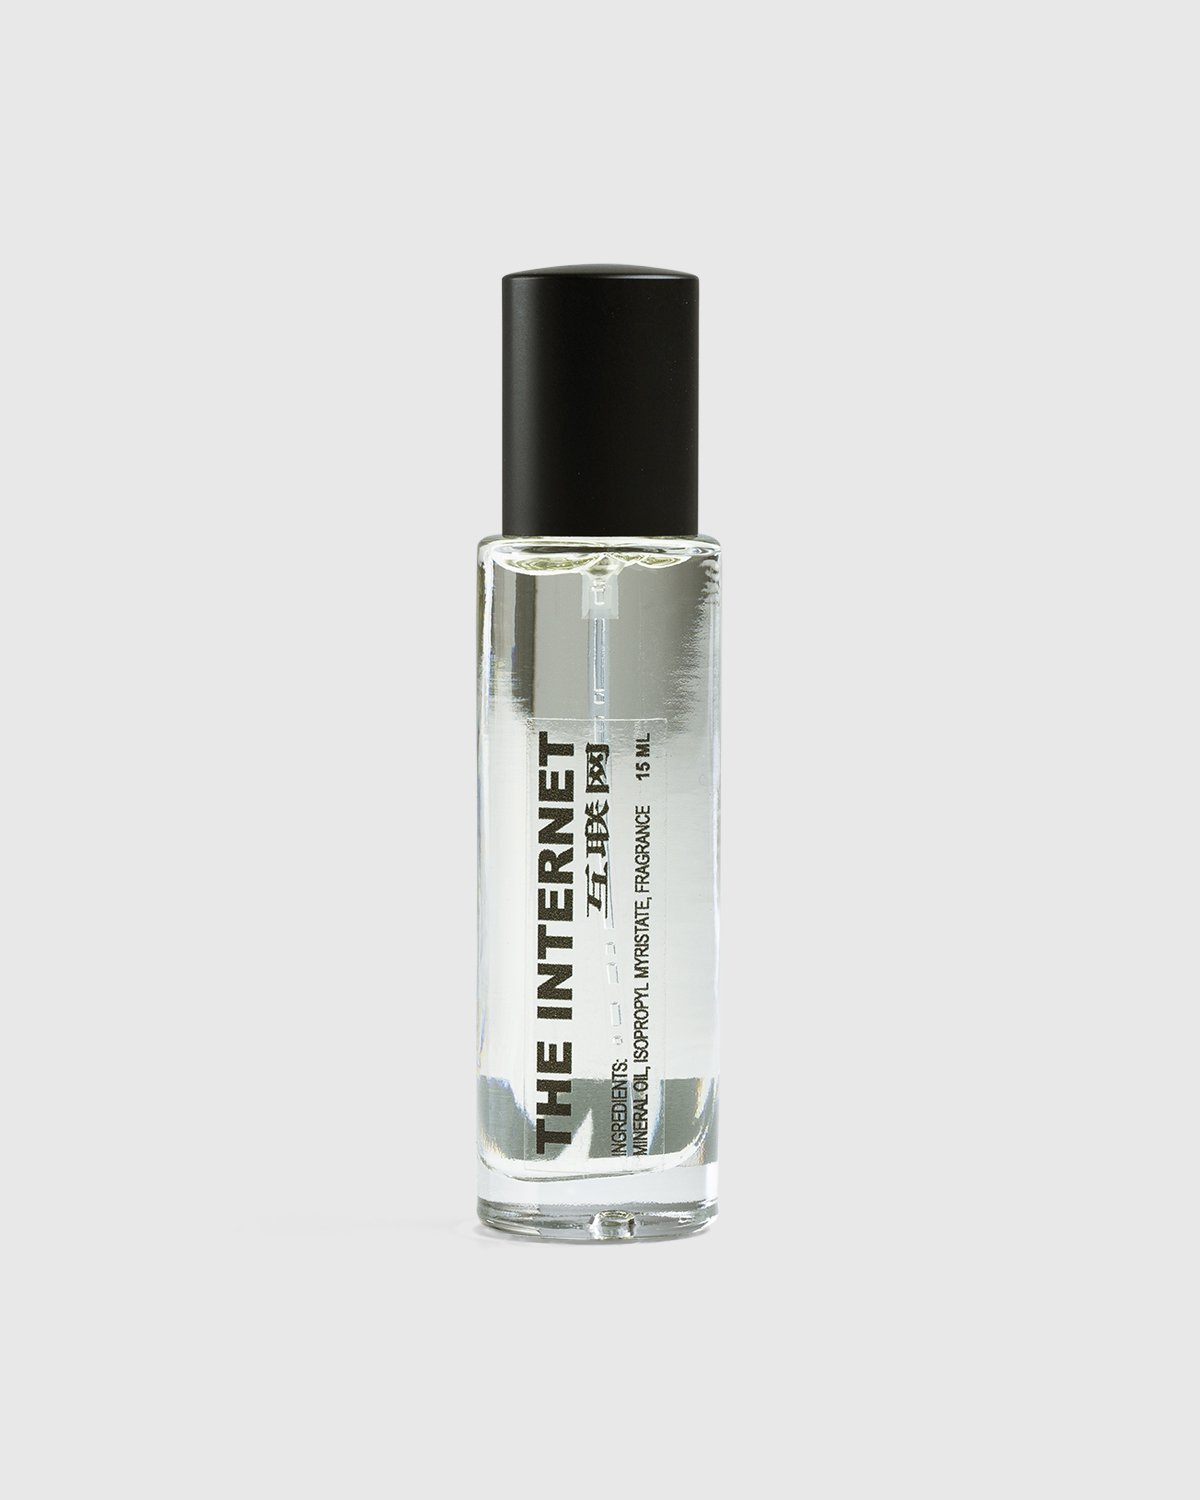 New Models x The Society of Scent x Highsnobiety - Scent of The Internet - Lifestyle - Multi - Image 1